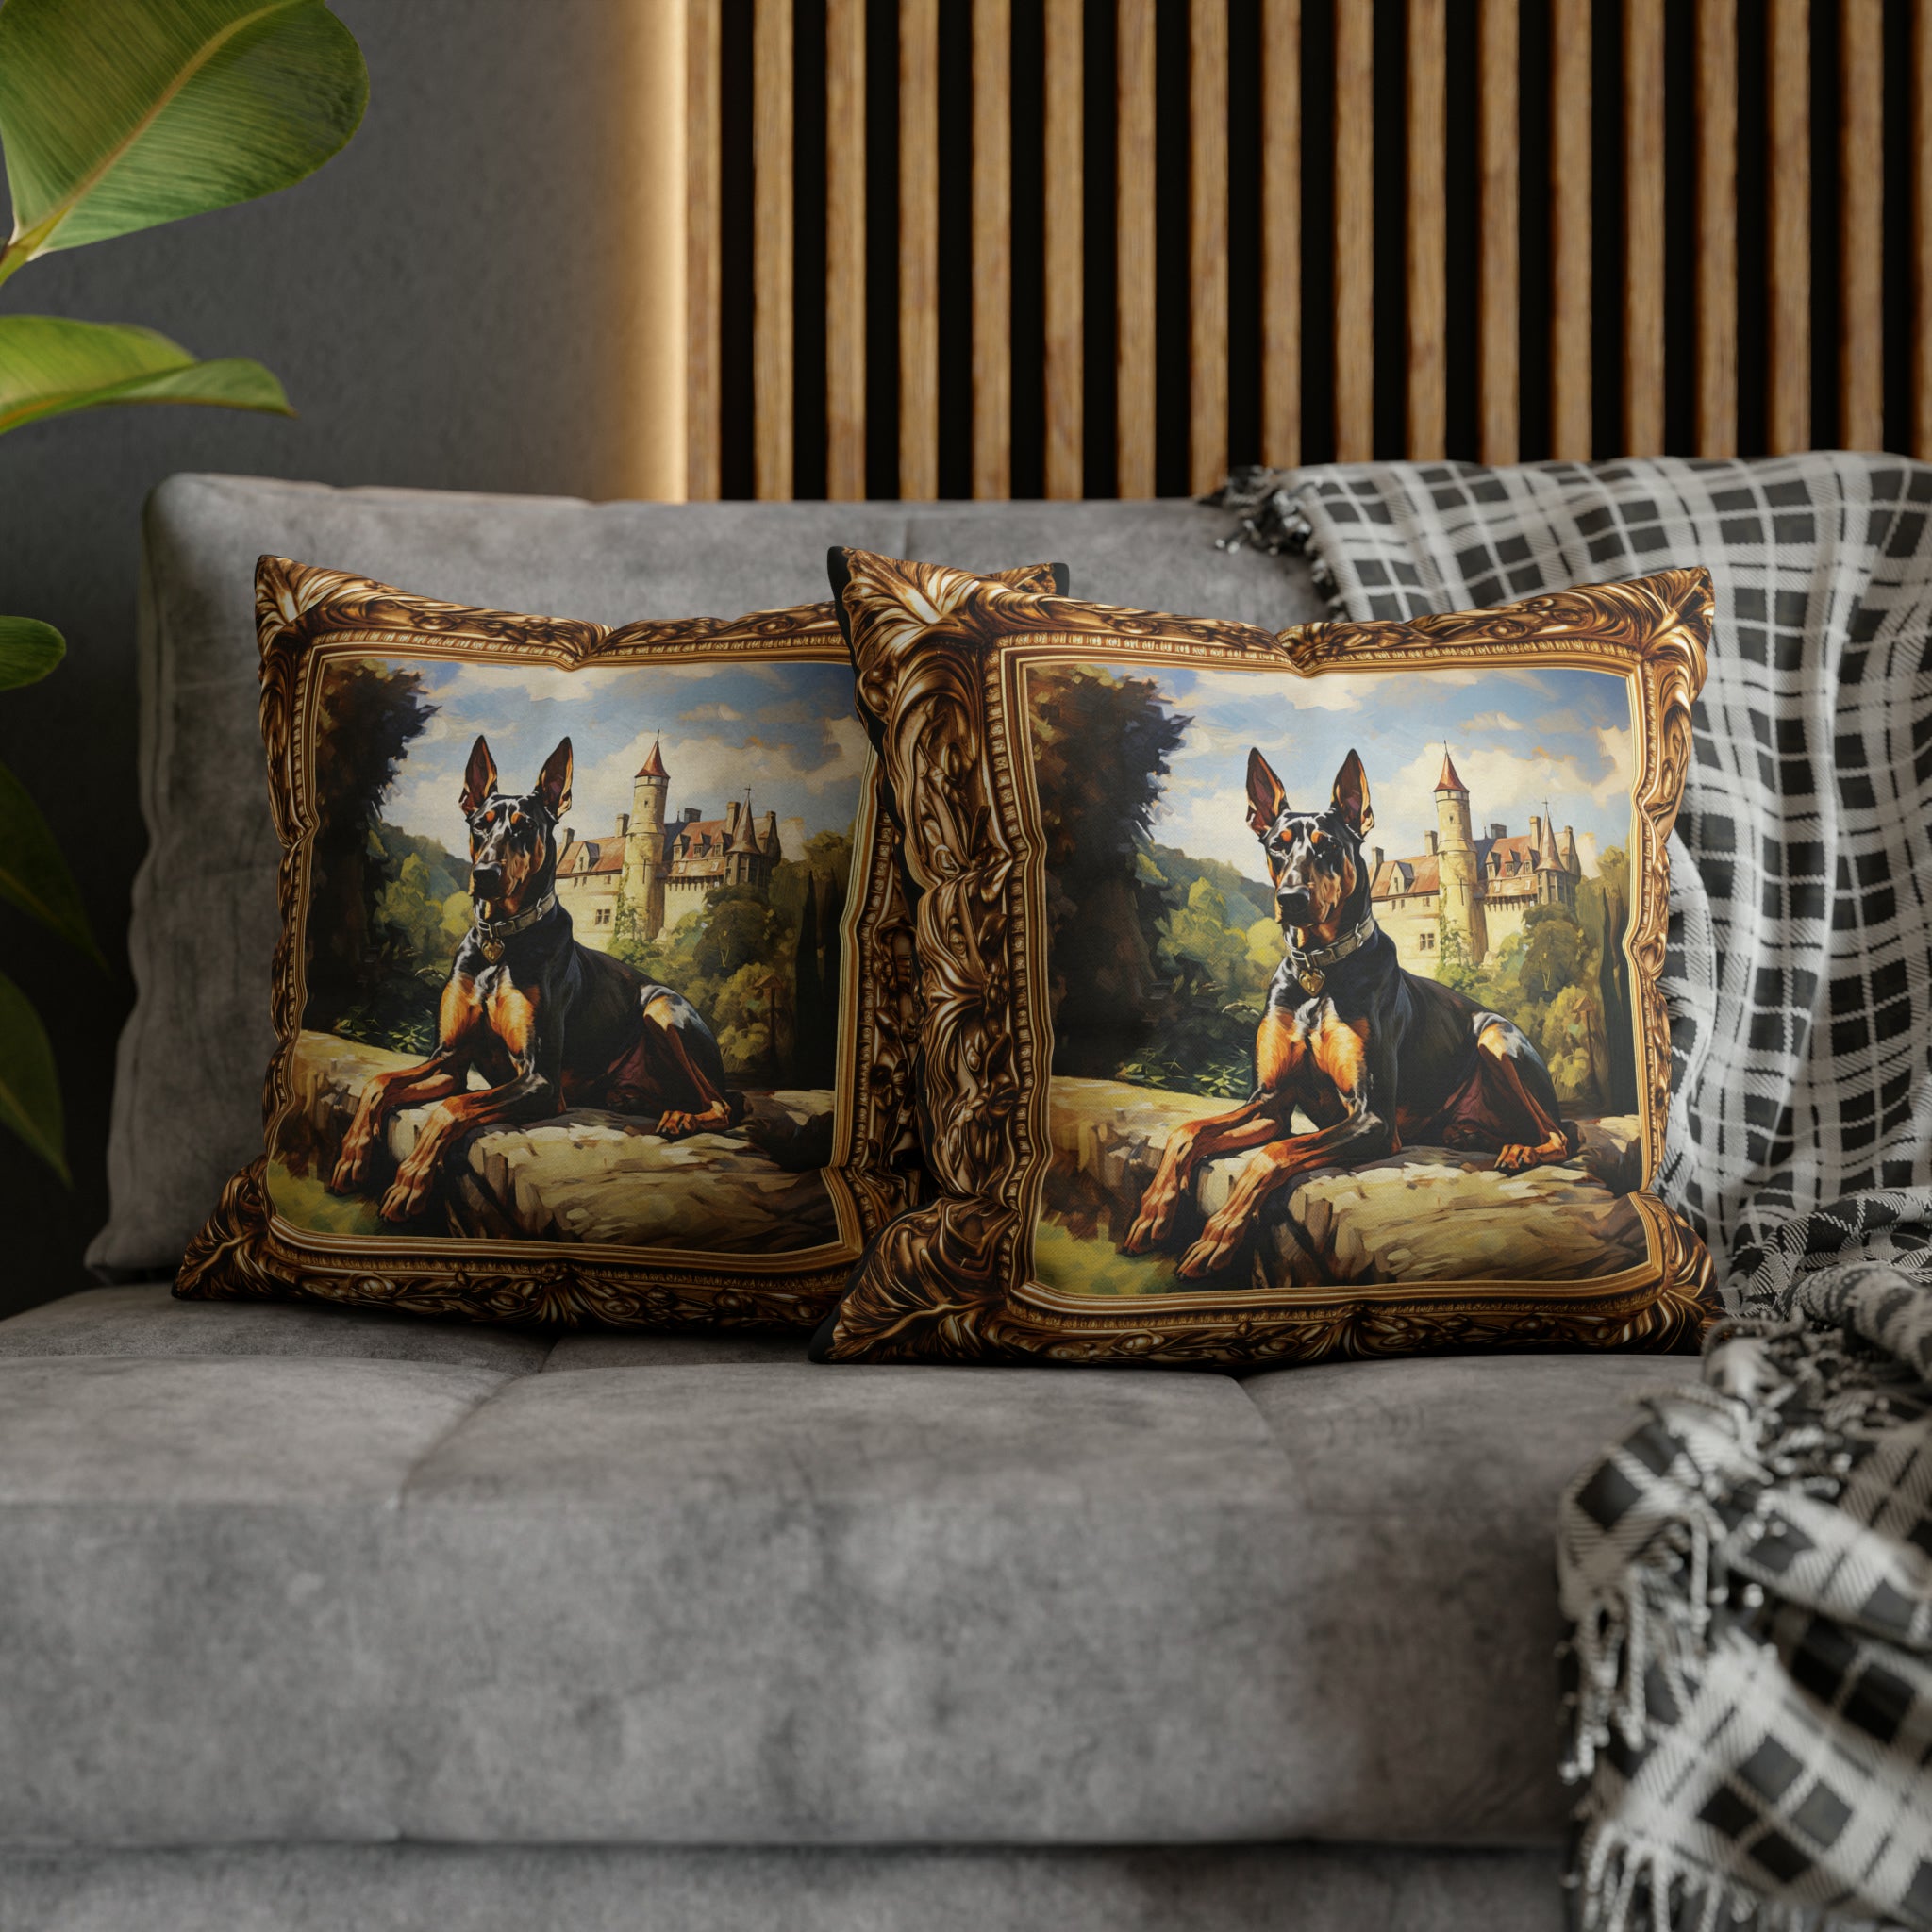 Square Pillow Case 18" x 18", CASE ONLY, no pillow form, original Art ,a Beautiful Painting of a Doberman in the English countryside.